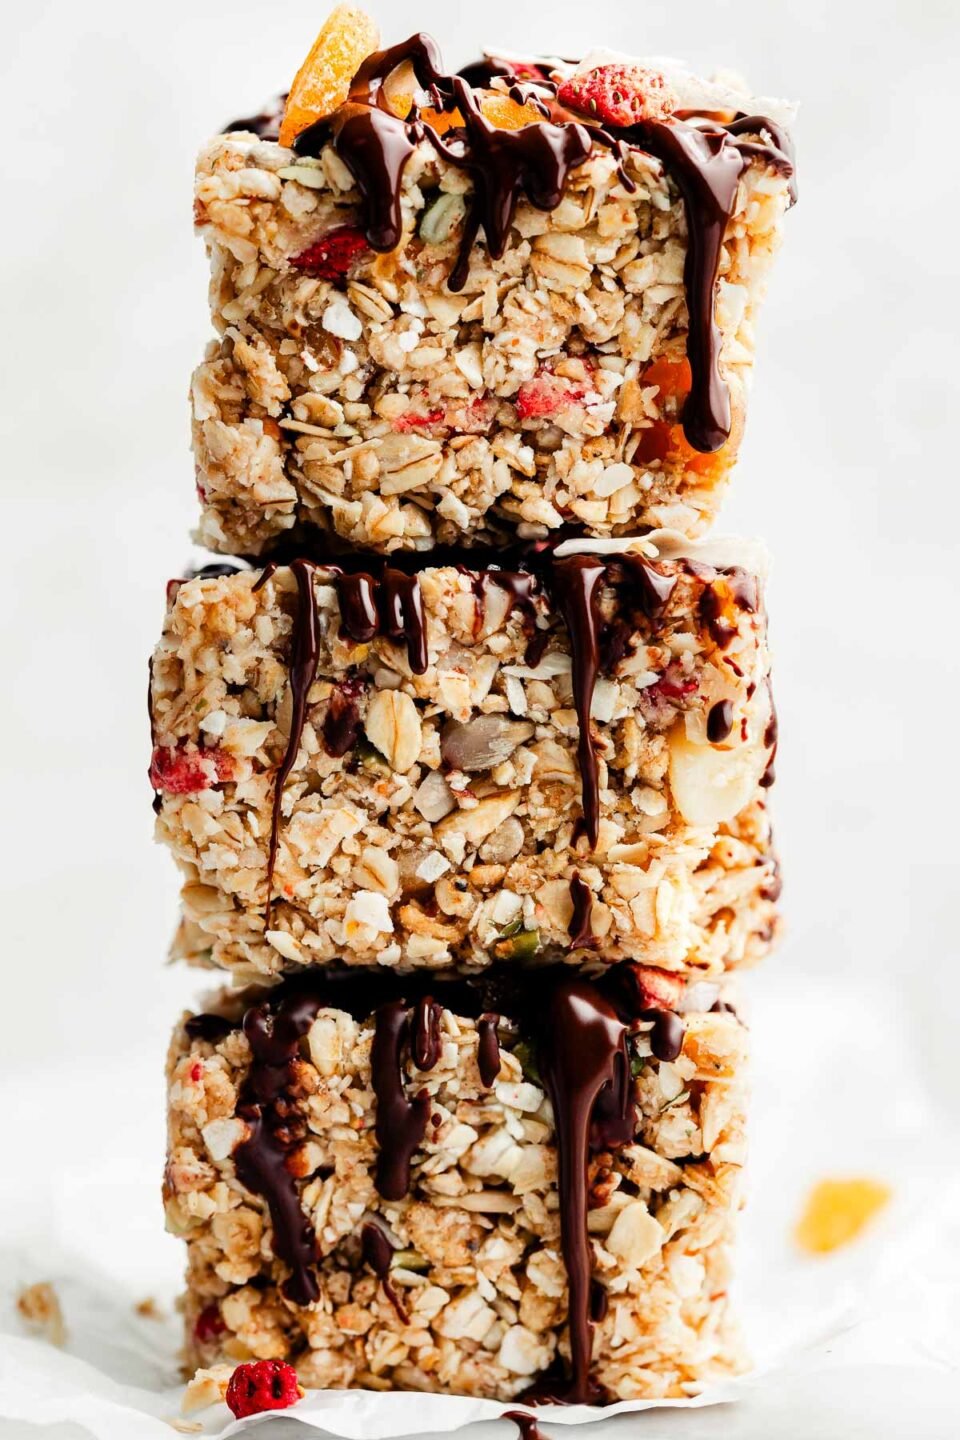 A side shot of a stack of three chocolate-drizzled muesli bars sitting on a piece of white parchment paper in front of a white background.